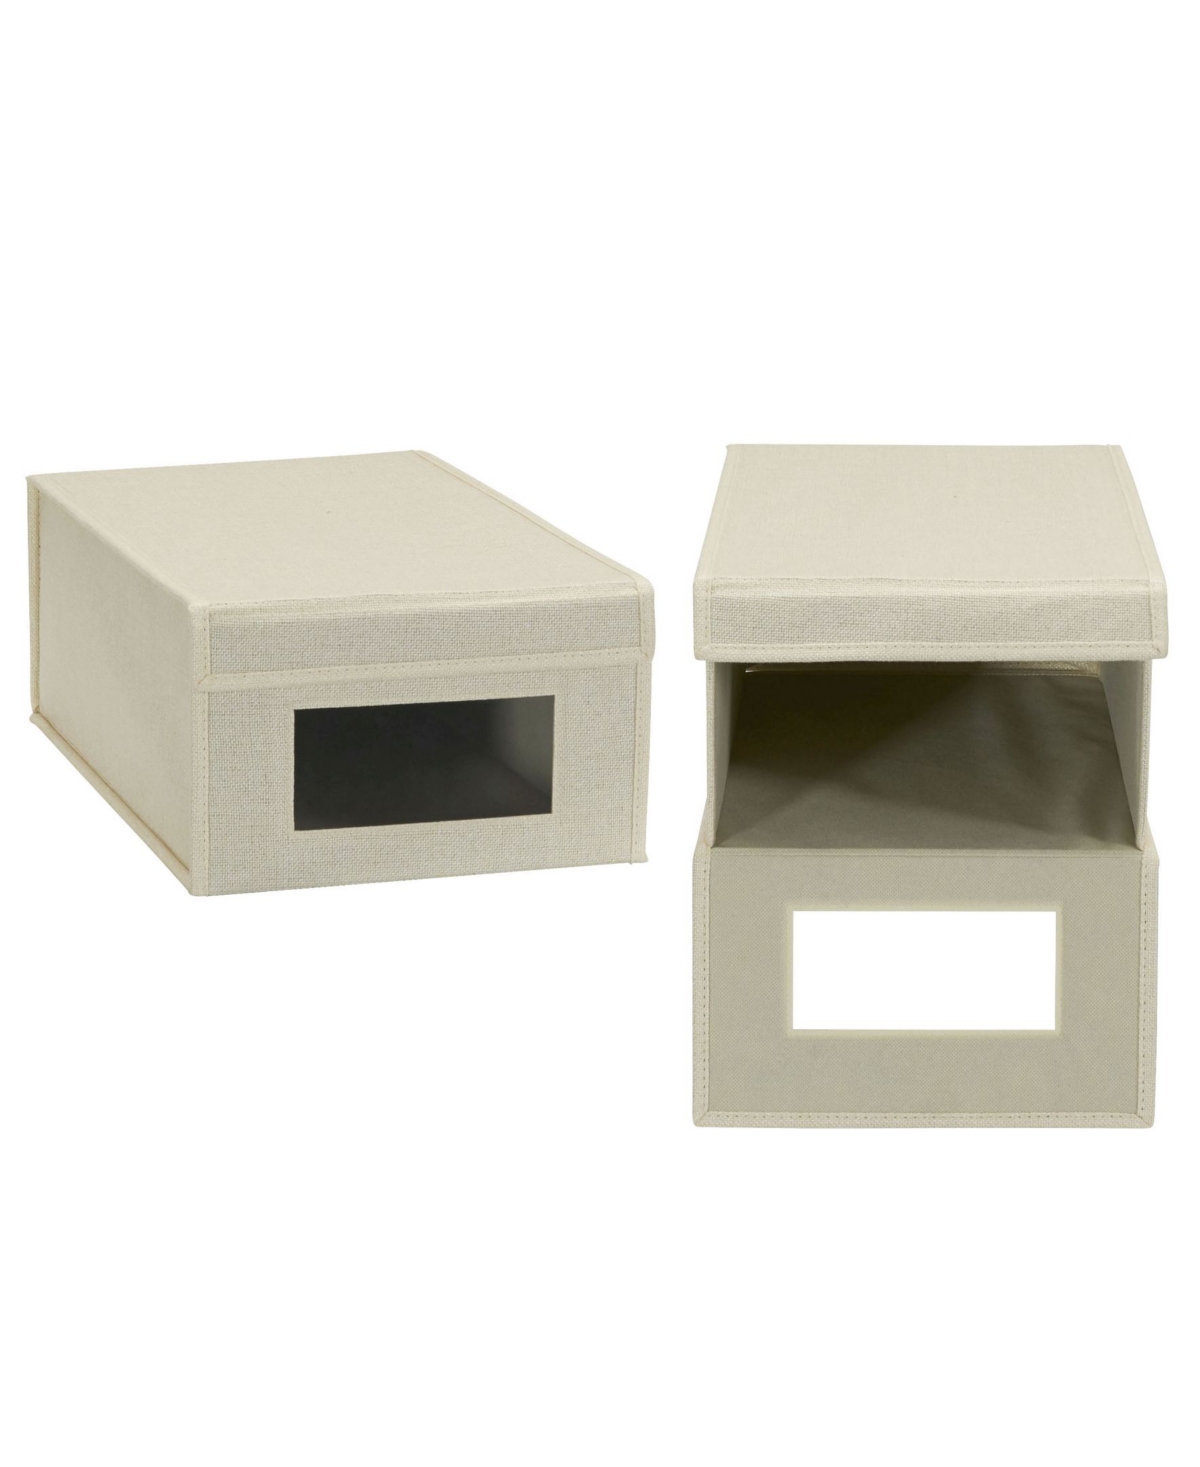 Household Essential Large Drop Front Shoe Box 2 Pack - Cream